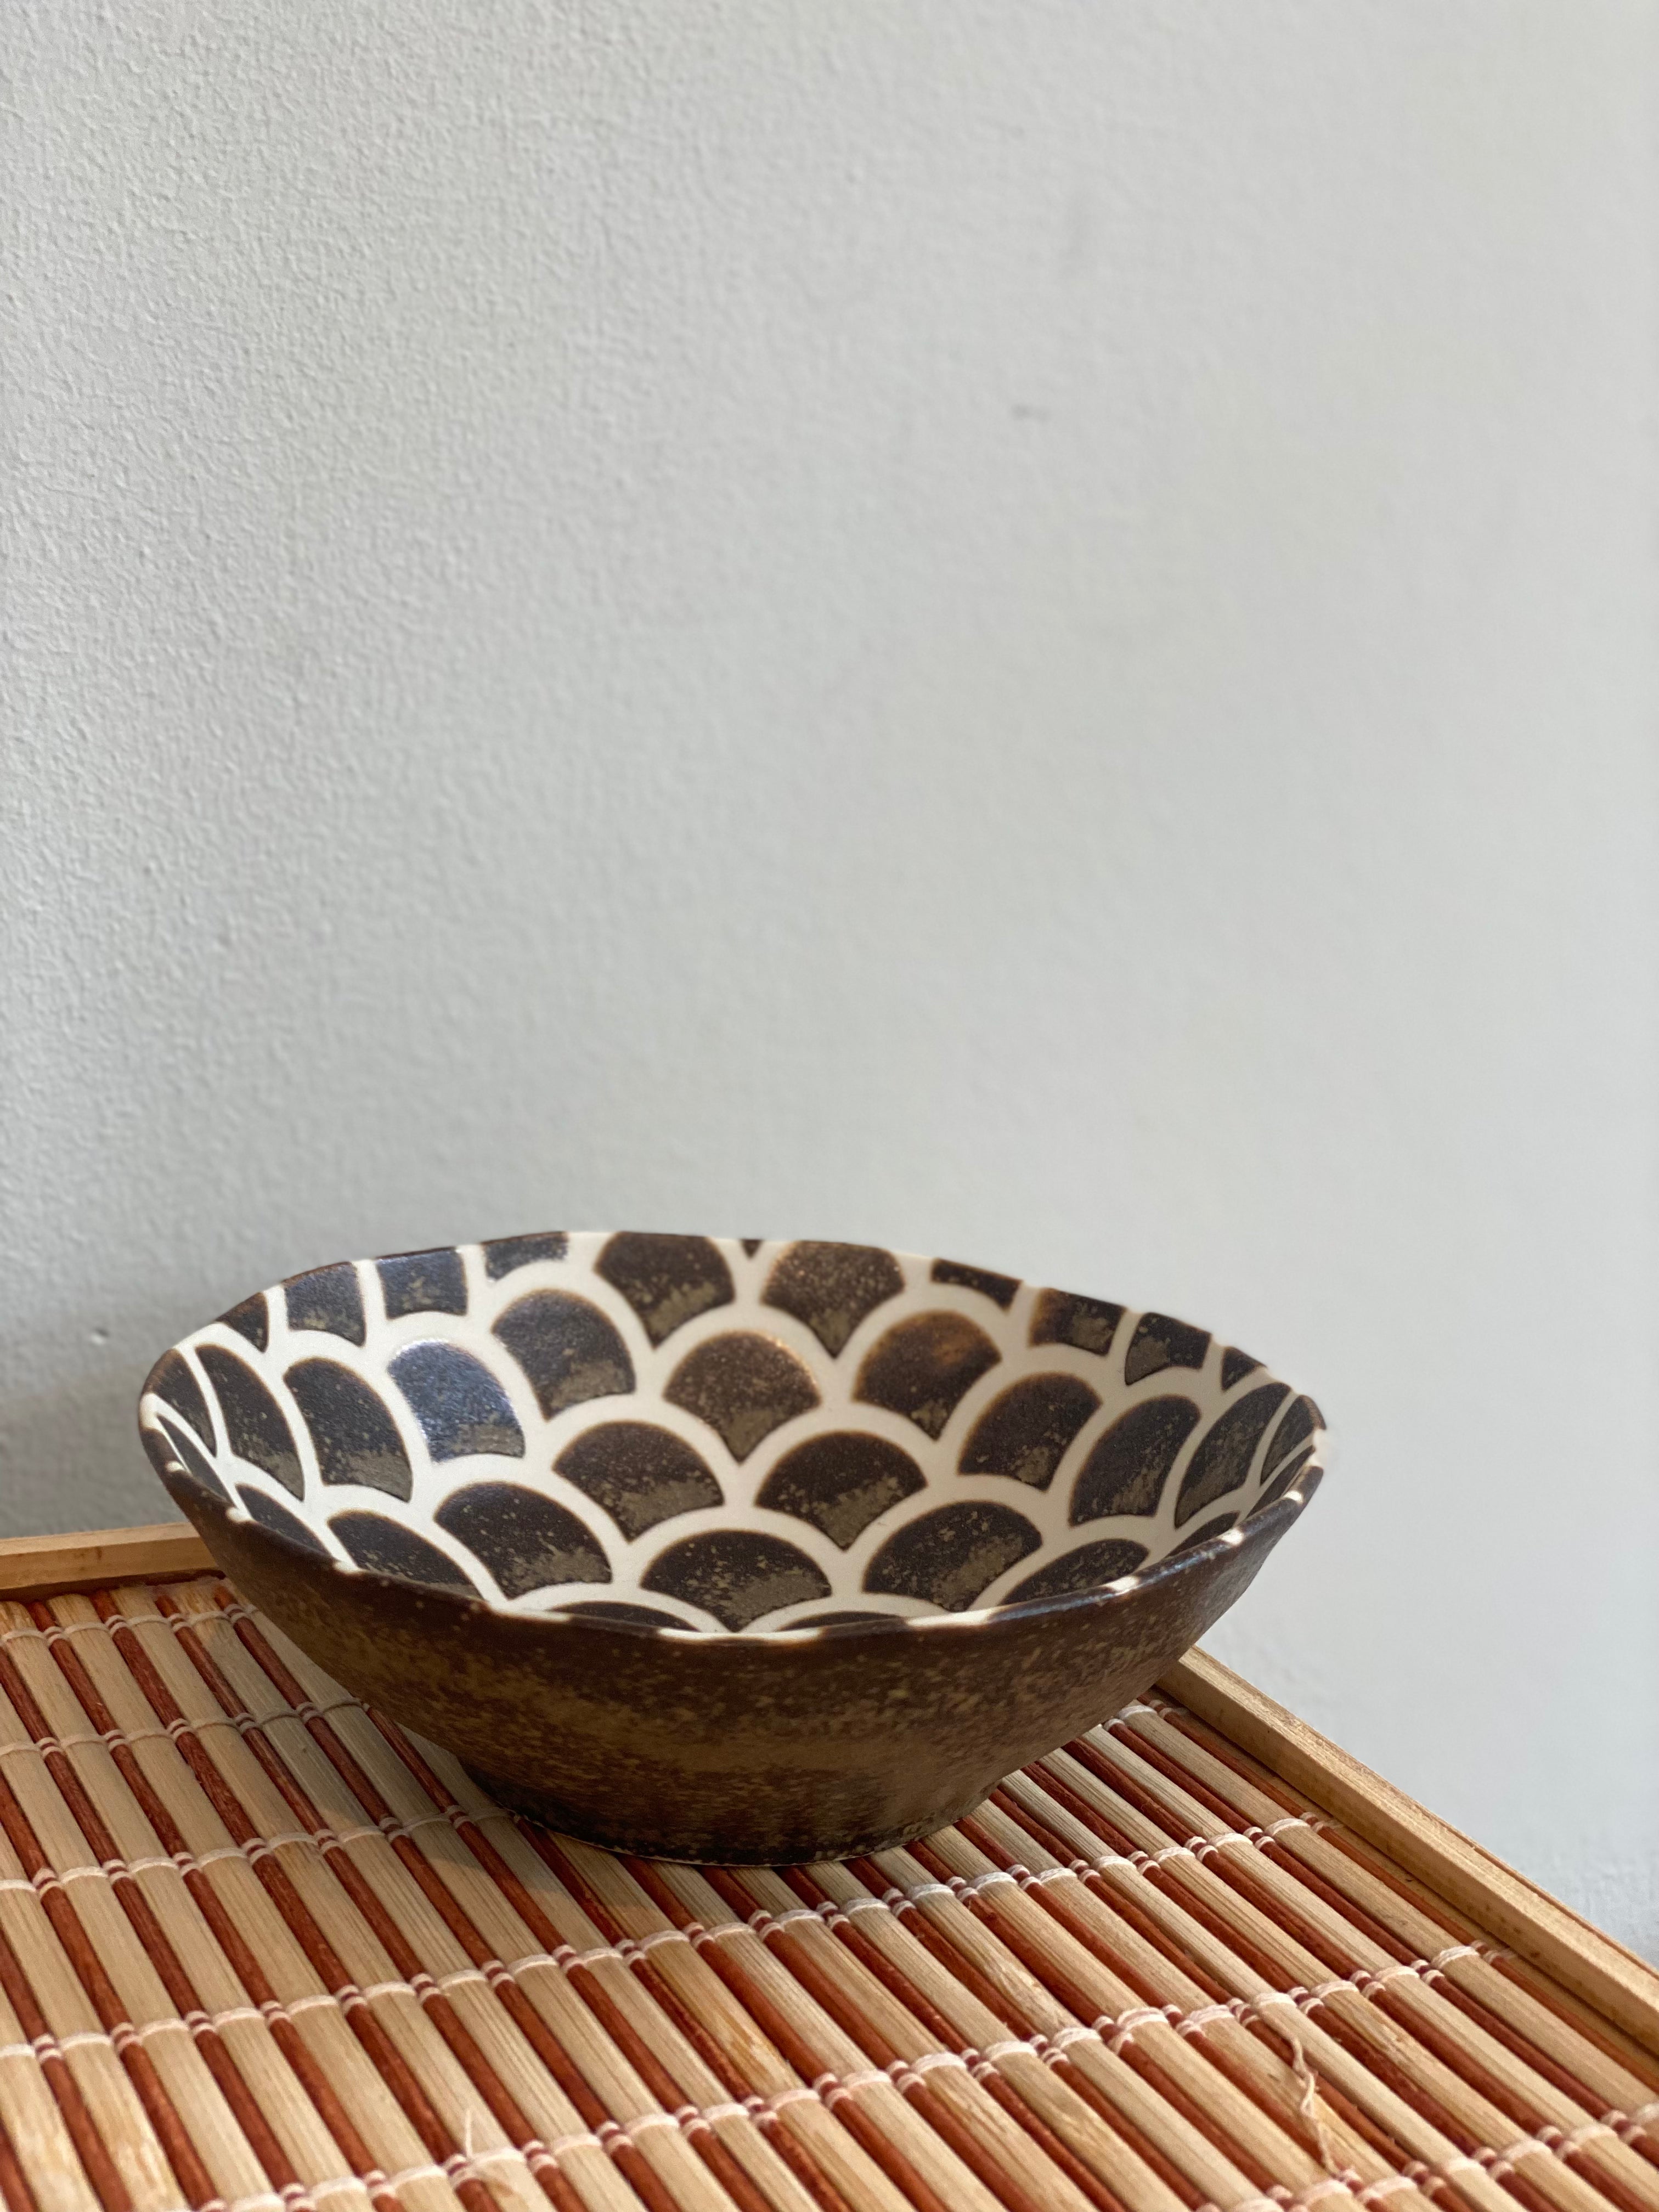 Small brown bowl with fish scales